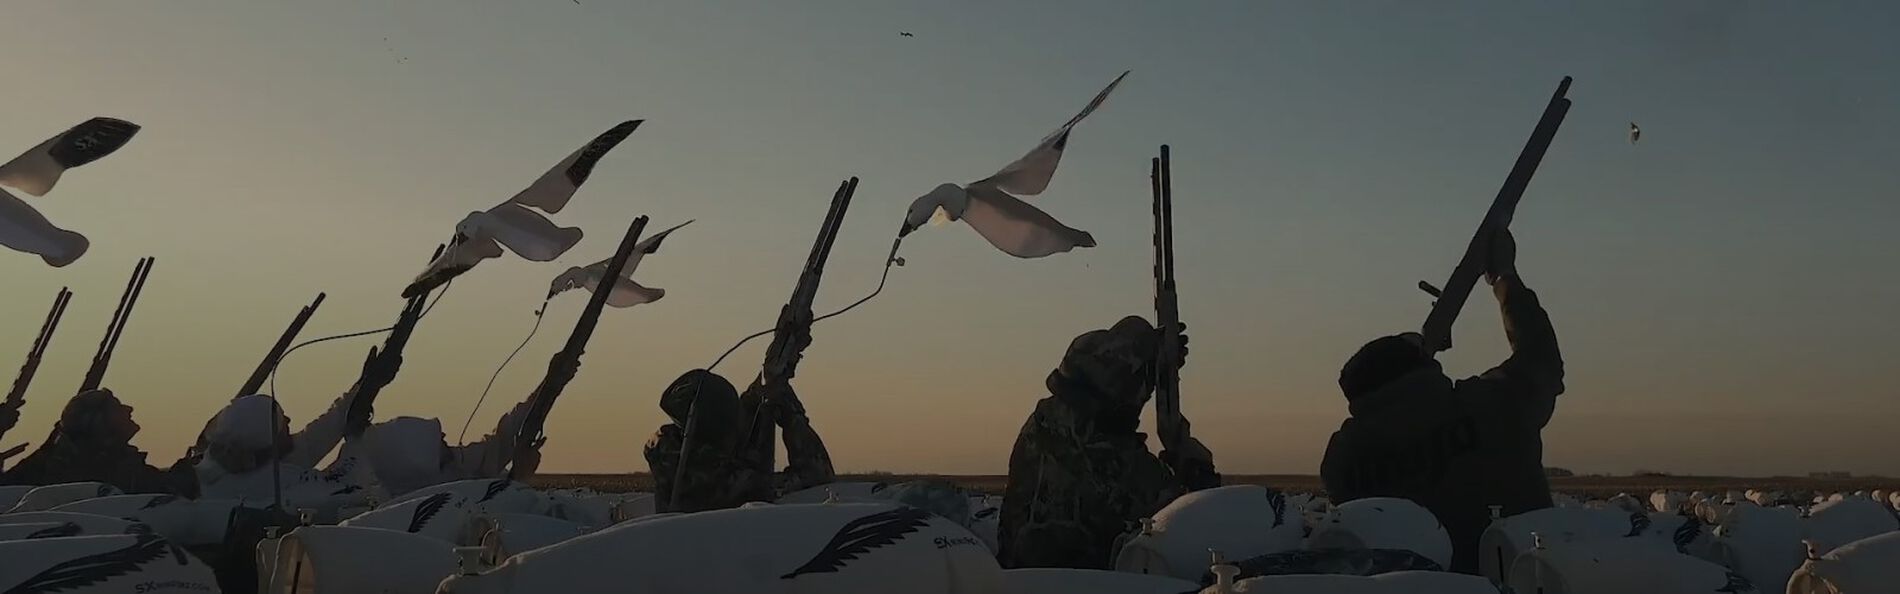 hunters sitting amoungst snow goose decoys with those shotguns pointed to the sky